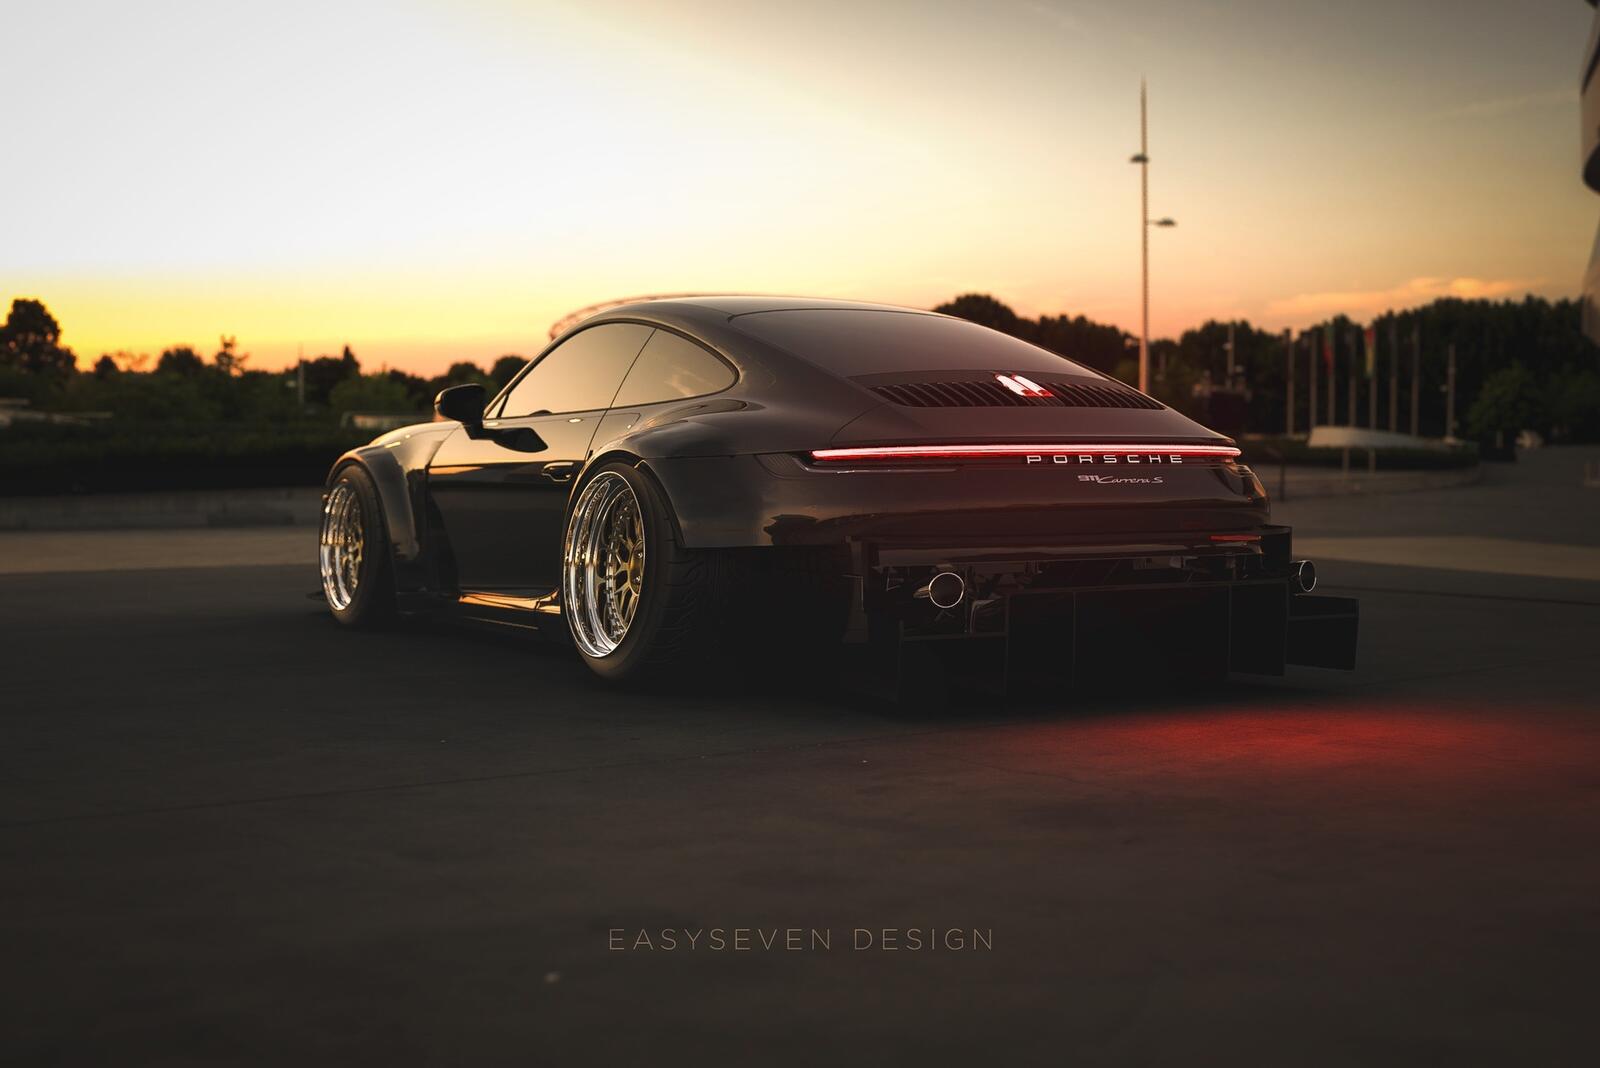 Free photo The 2020 Porsche 911 stands at sunset rear view